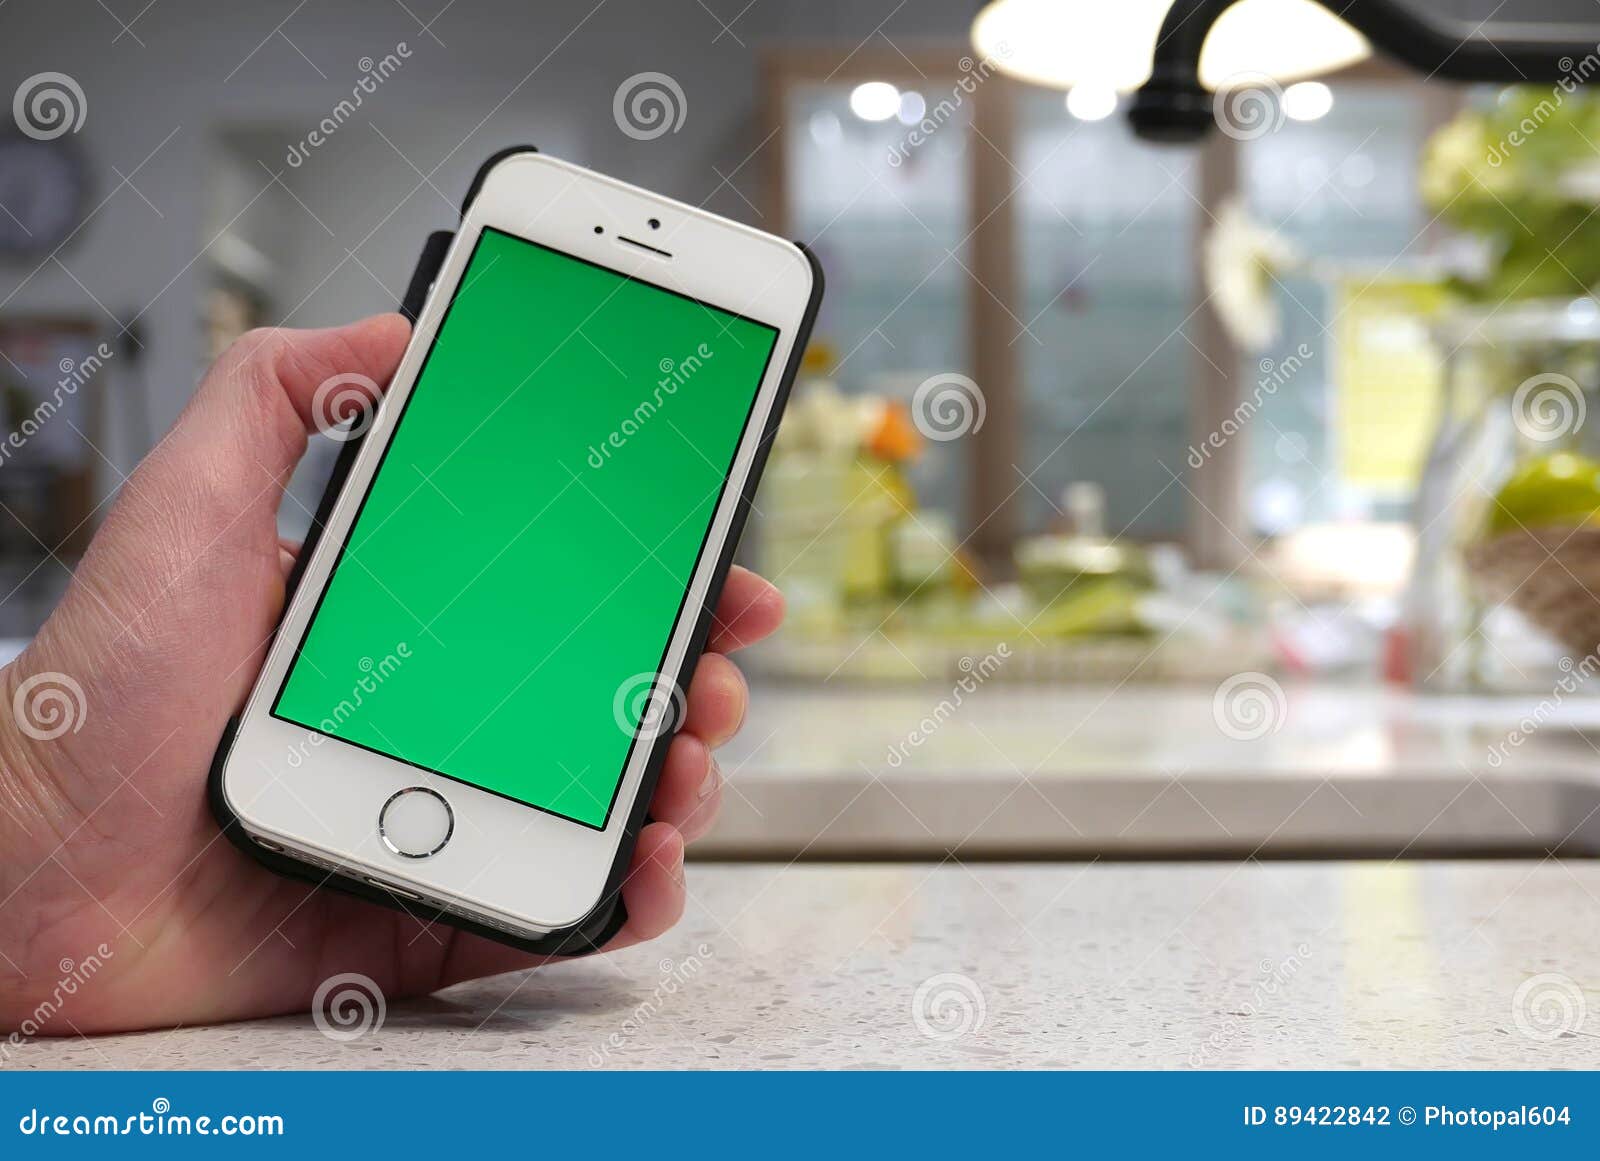 Woman Holding Green Screen Iphone Stock Photo - Image of mobile, motion:  89422842